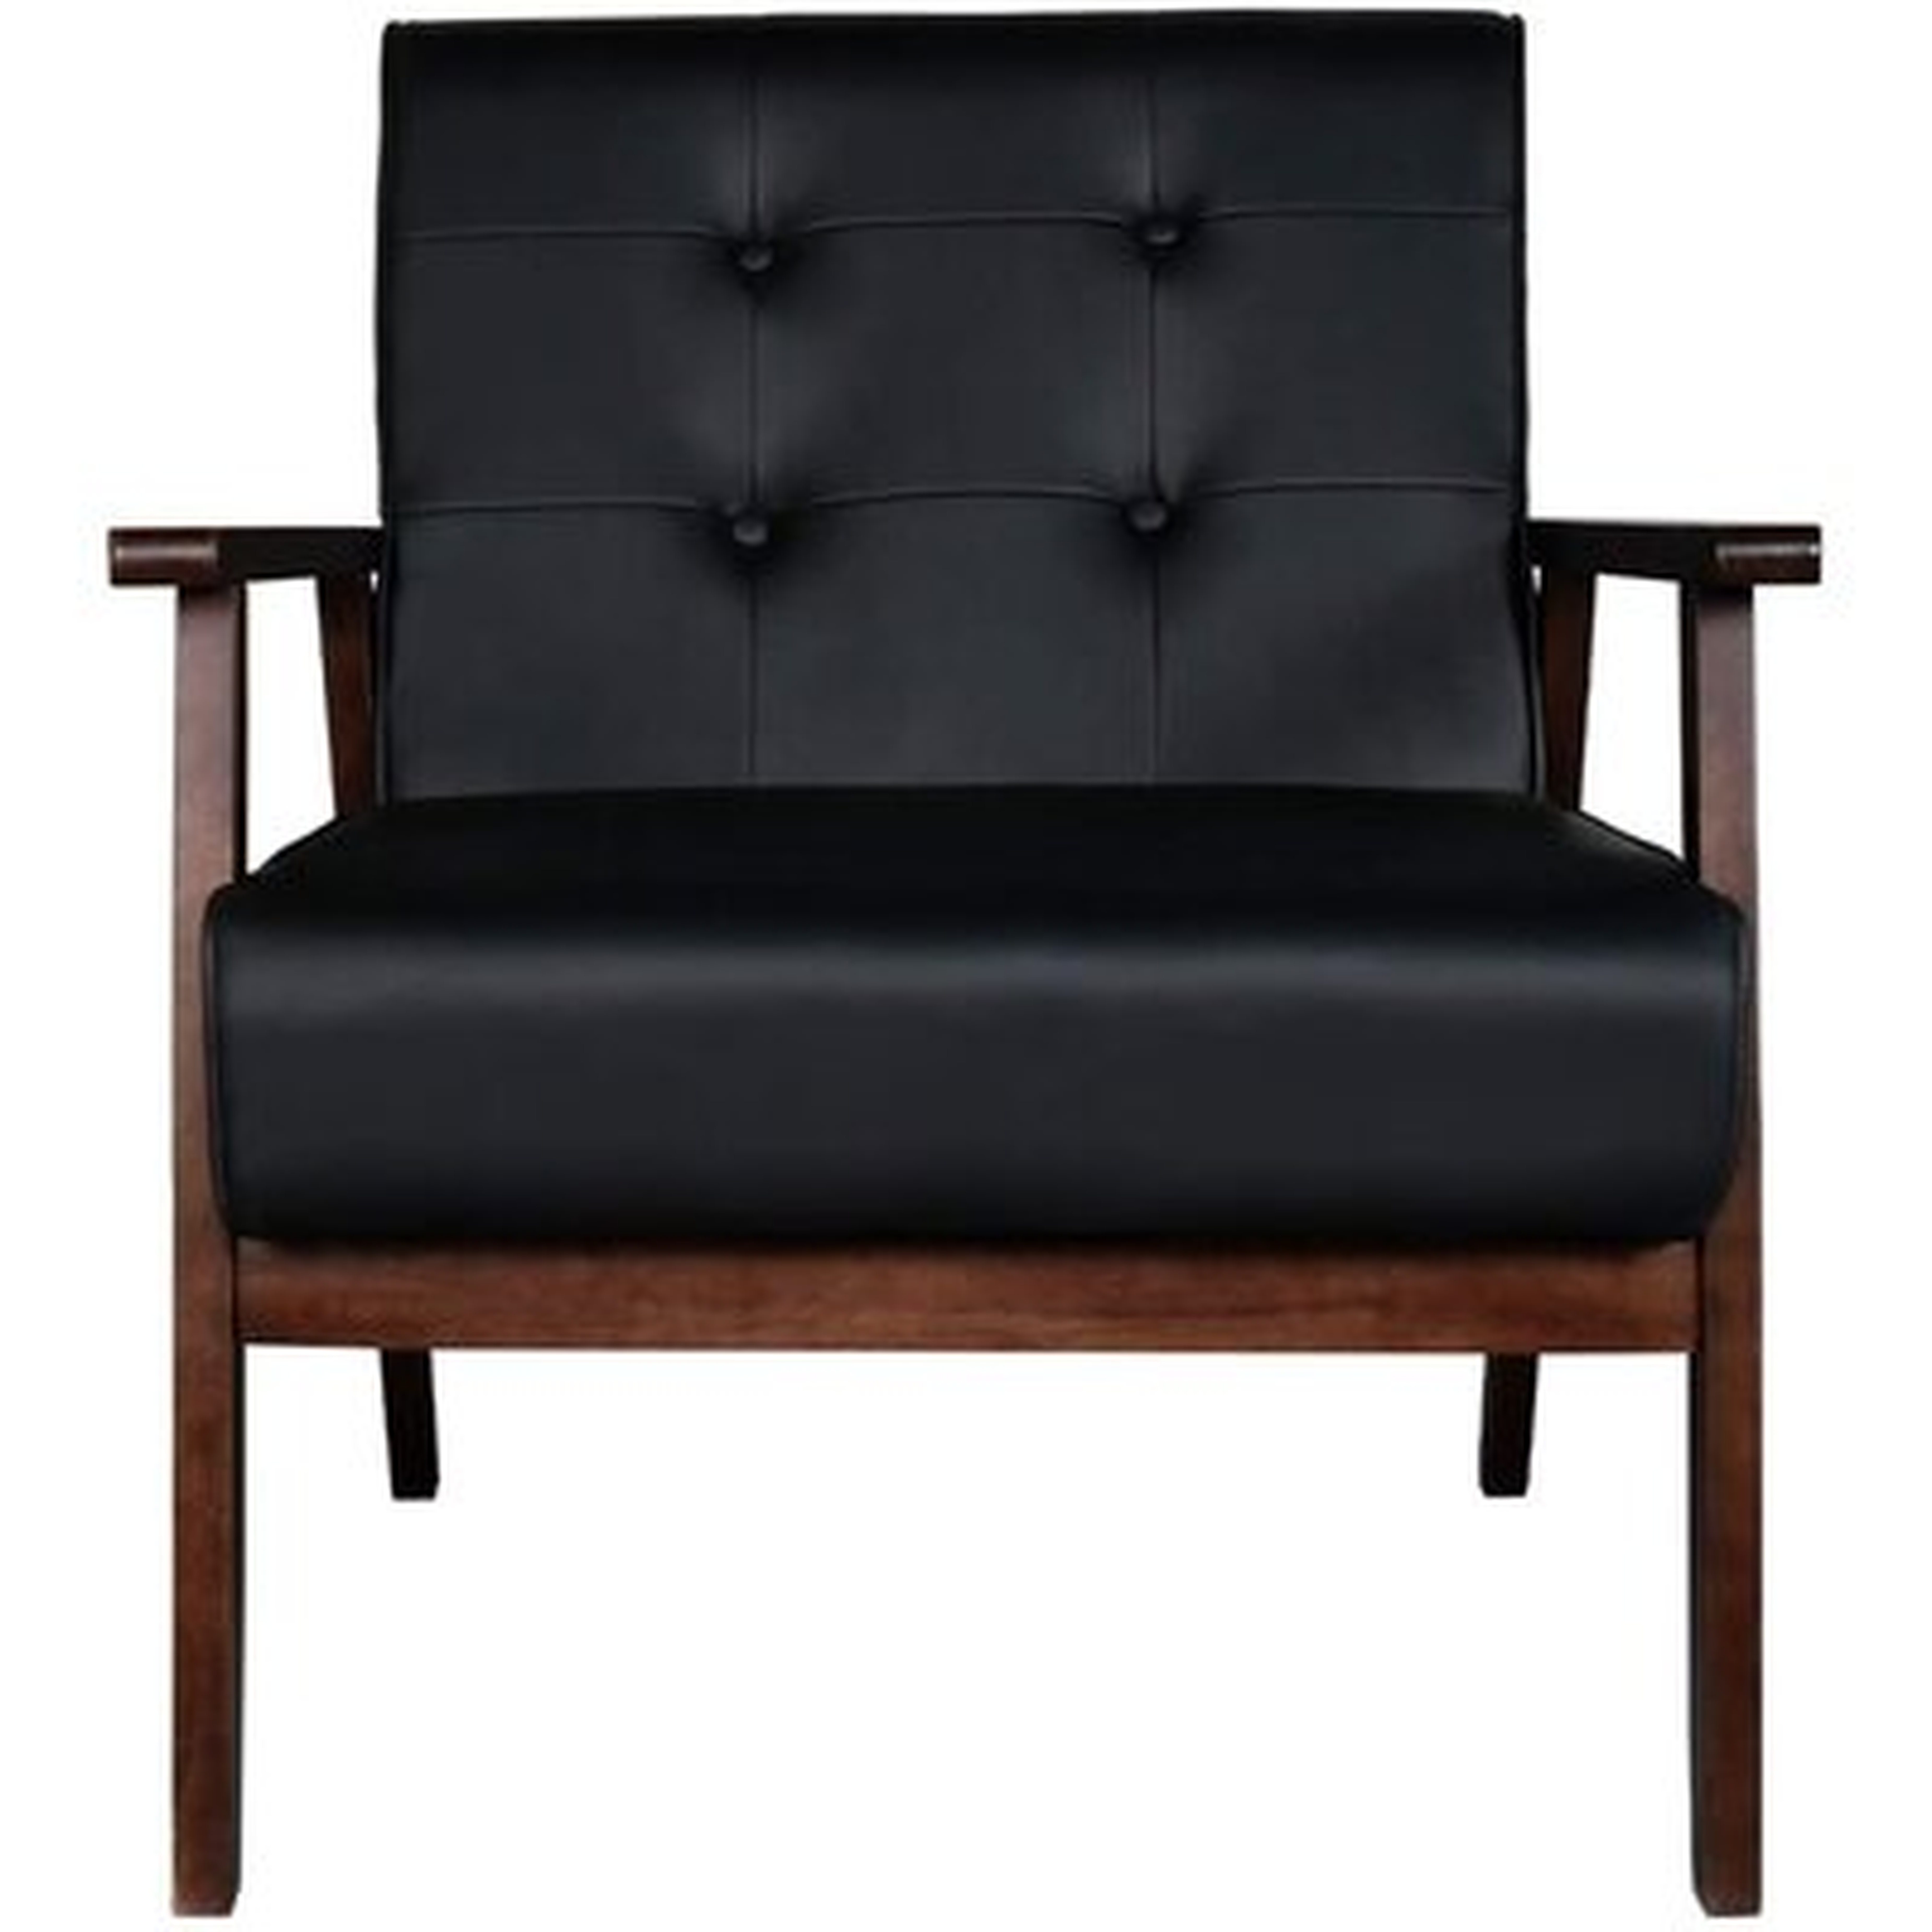 Mid-Century Retro Modern Accent Chair Wooden Arm Upholstered Tufted Back Lounge Chairs Seat Size 24.4" 18.3" (Deep) (Square Leg Black) - Wayfair